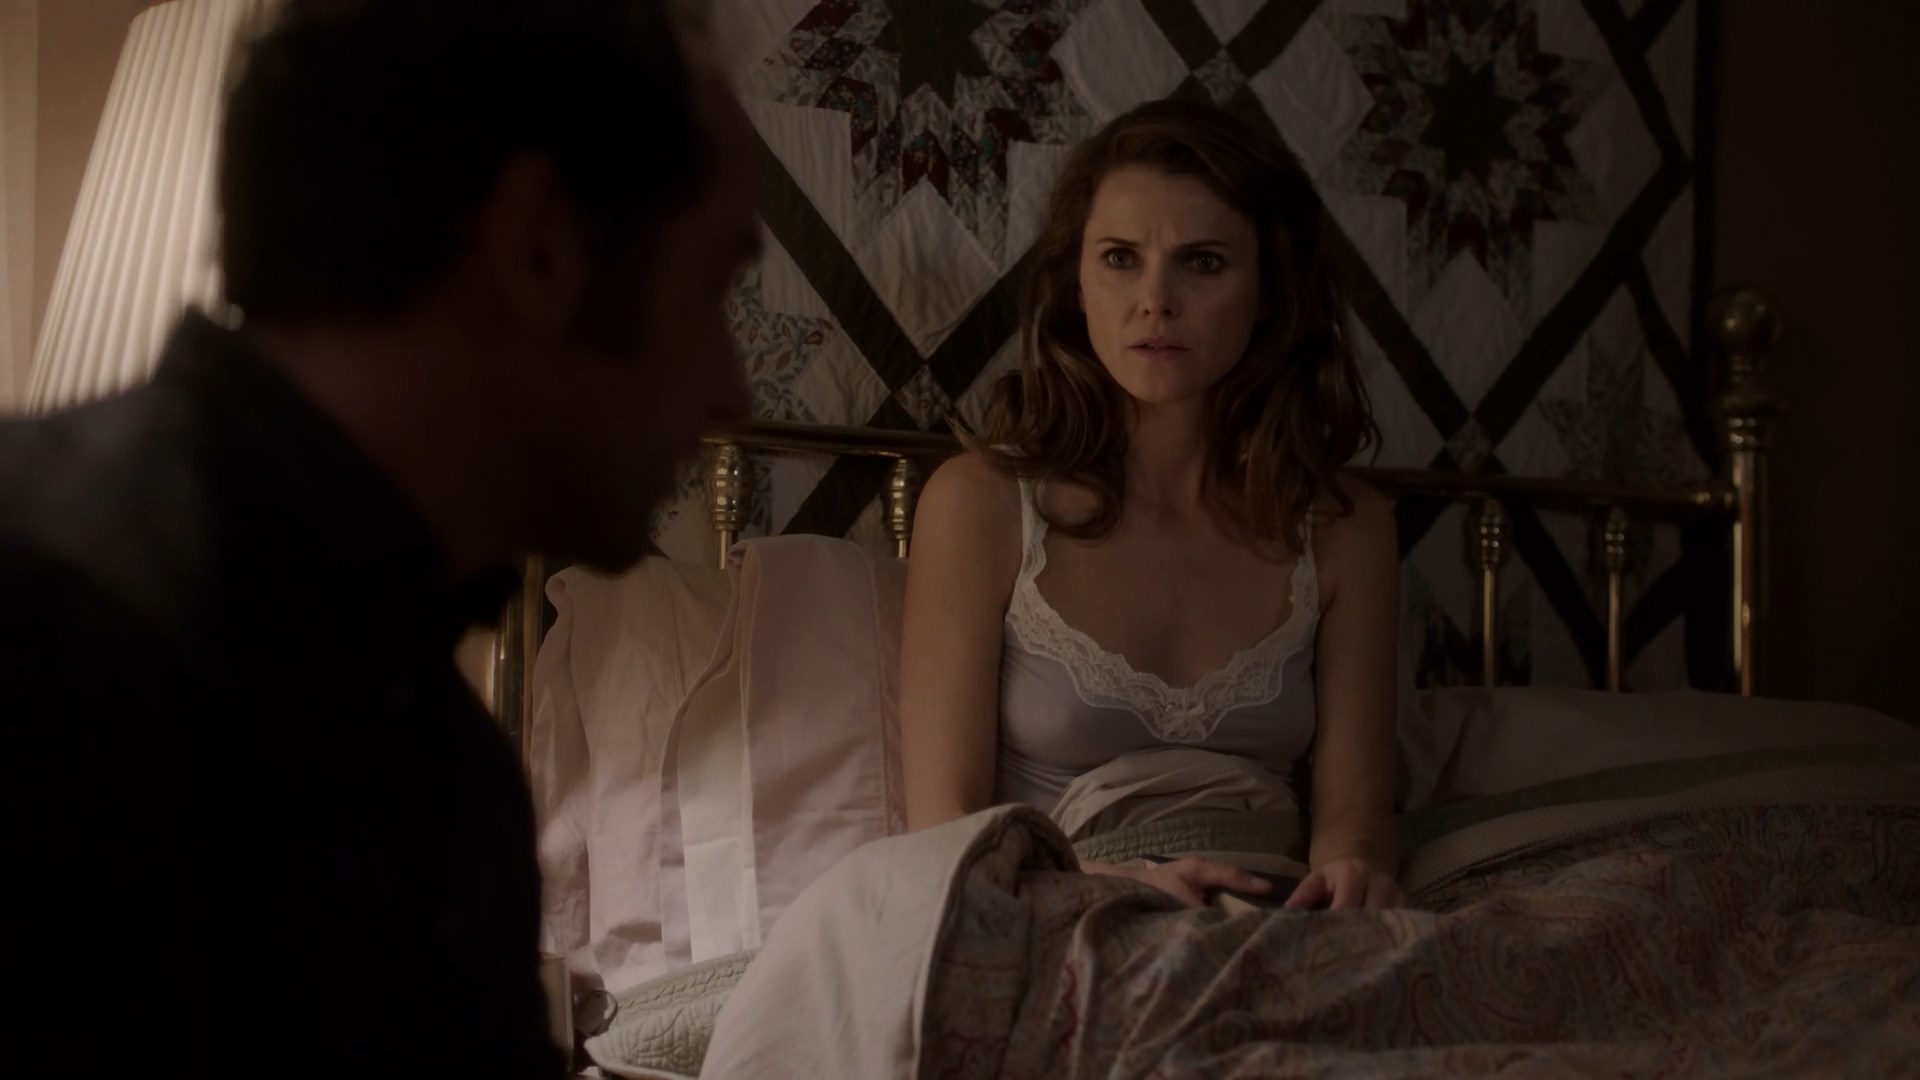 Keri Russell sexy– The Americans s04e02 (2016)